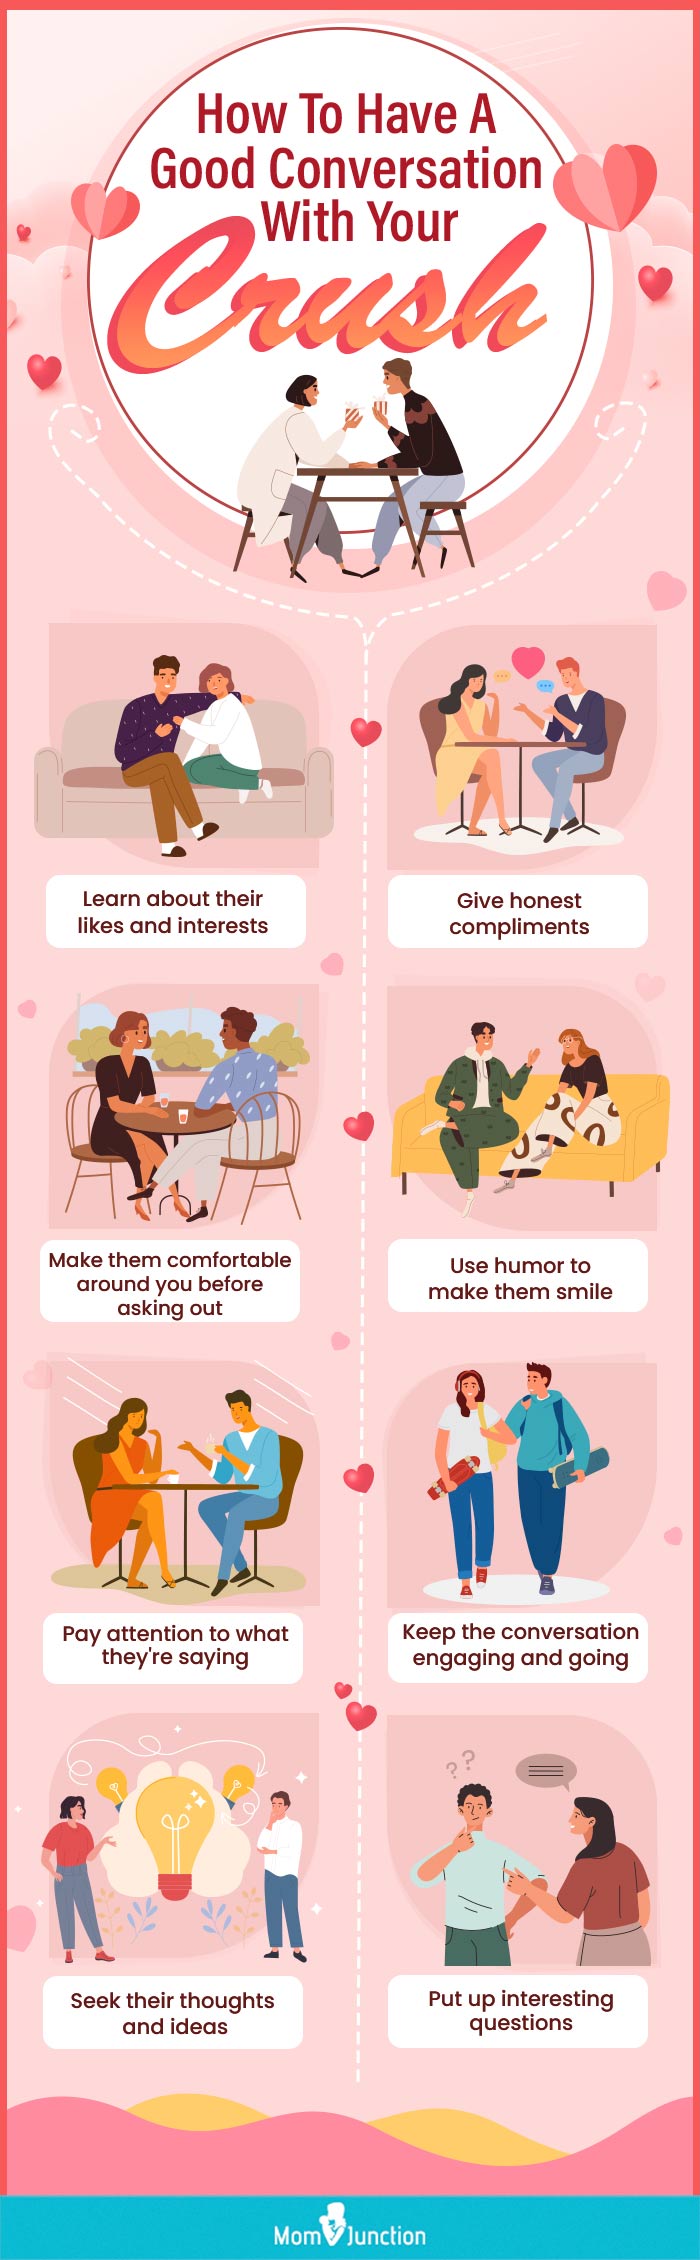 how to have a good conversation with your crush (infographic)